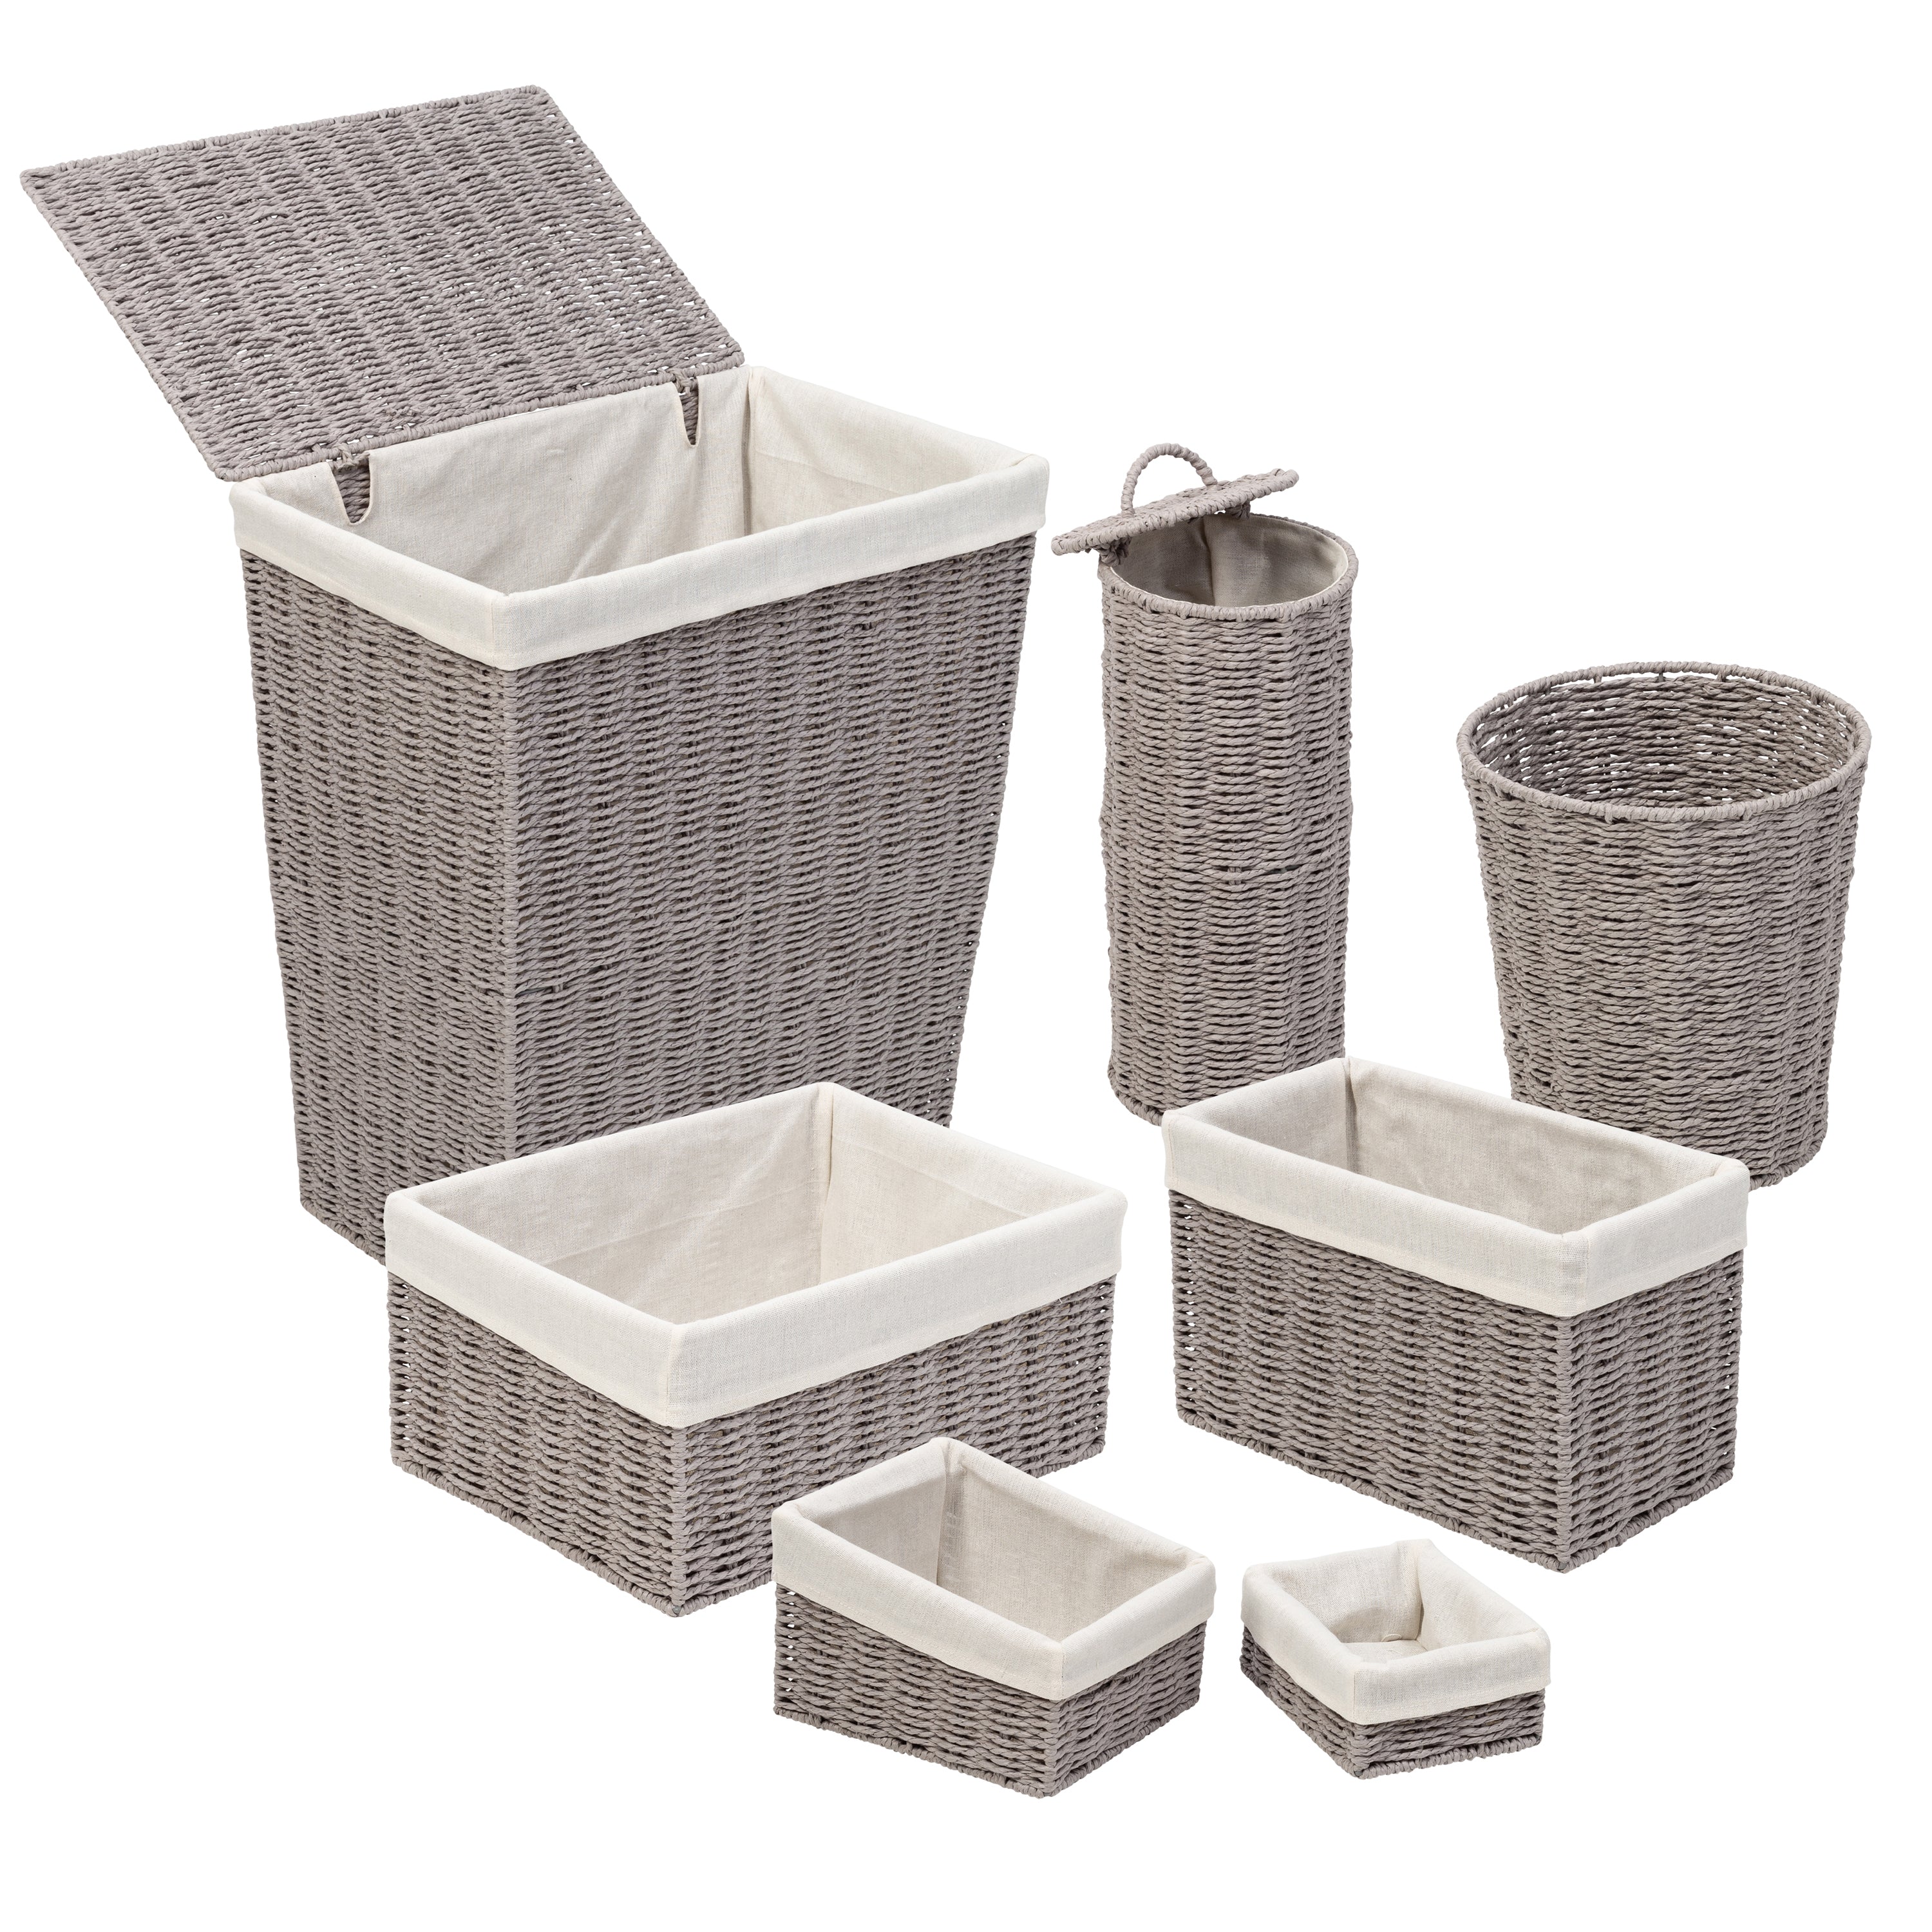 16 x 9 x 6 Woven Twisted Paper Rope Media Basket Gray - Brightroom™